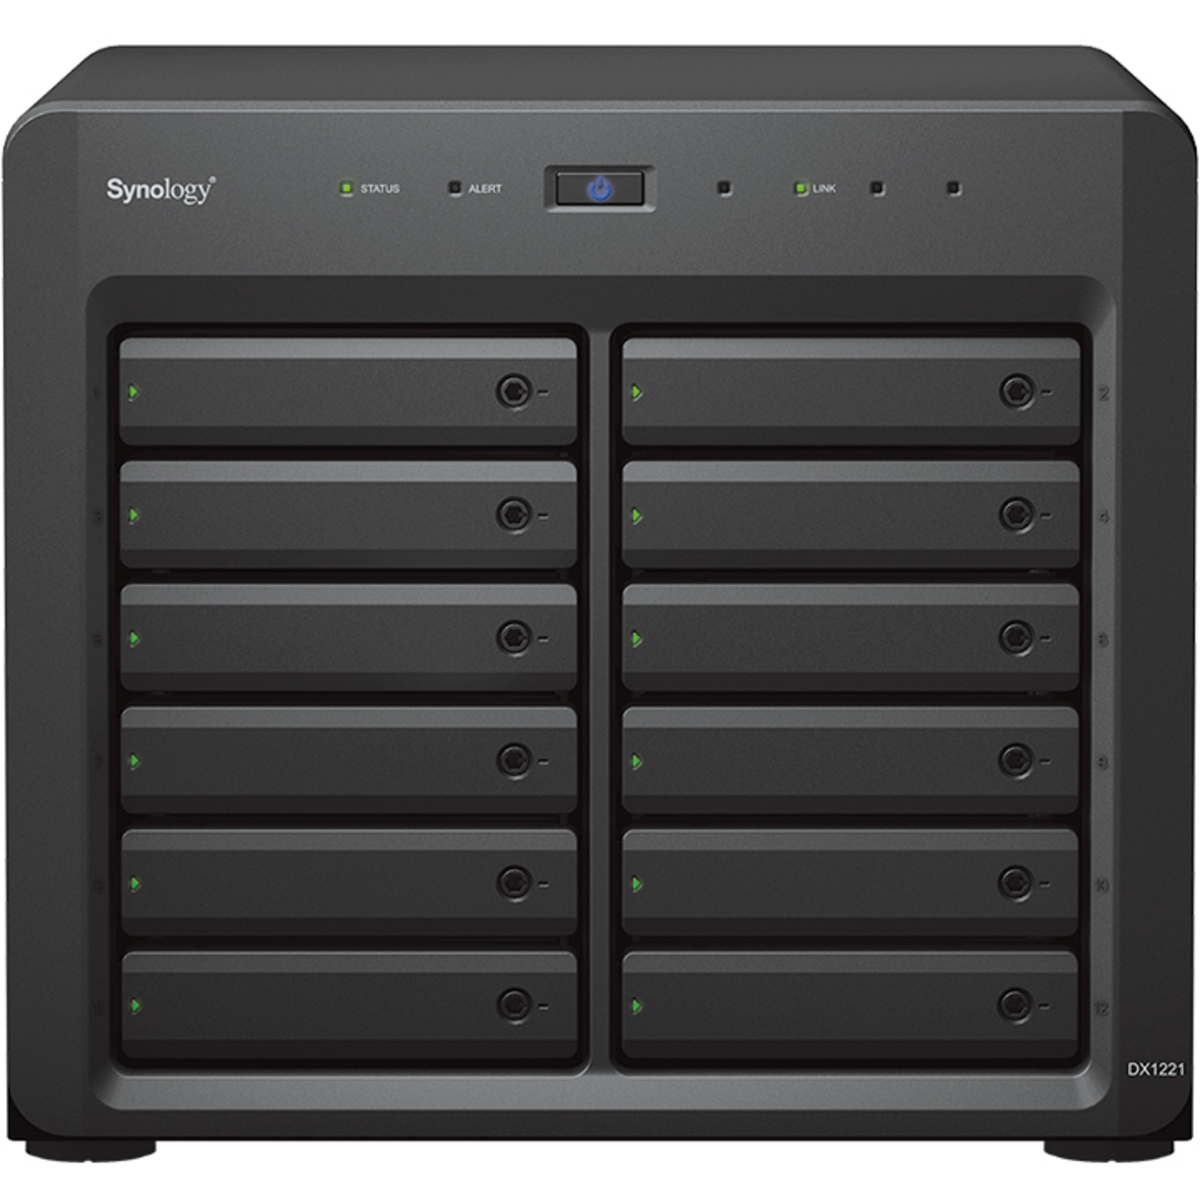 Synology DX1222 External Expansion Drive 96tb 12-Bay Desktop Multimedia / Power User / Business Expansion Enclosure 12x8tb Western Digital Red Pro WD8003FFBX 3.5 7200rpm SATA 6Gb/s HDD NAS Class Drives Installed - Burn-In Tested DX1222 External Expansion Drive